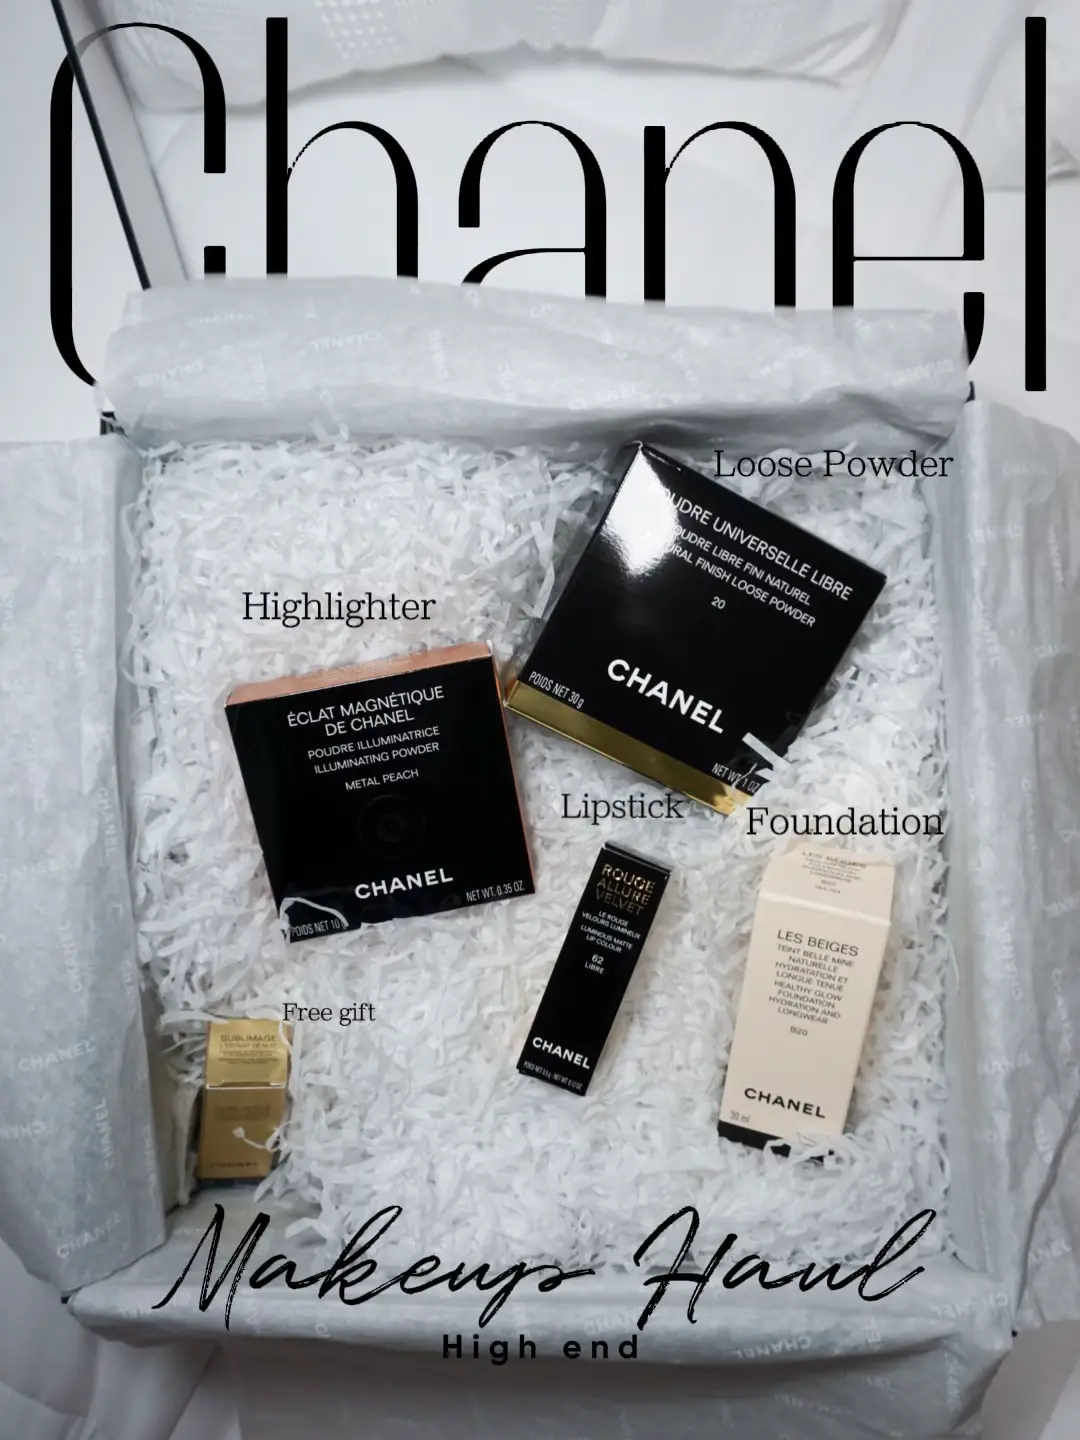 Chanel Beauty Unboxing, Gallery posted by Meganelizabeth